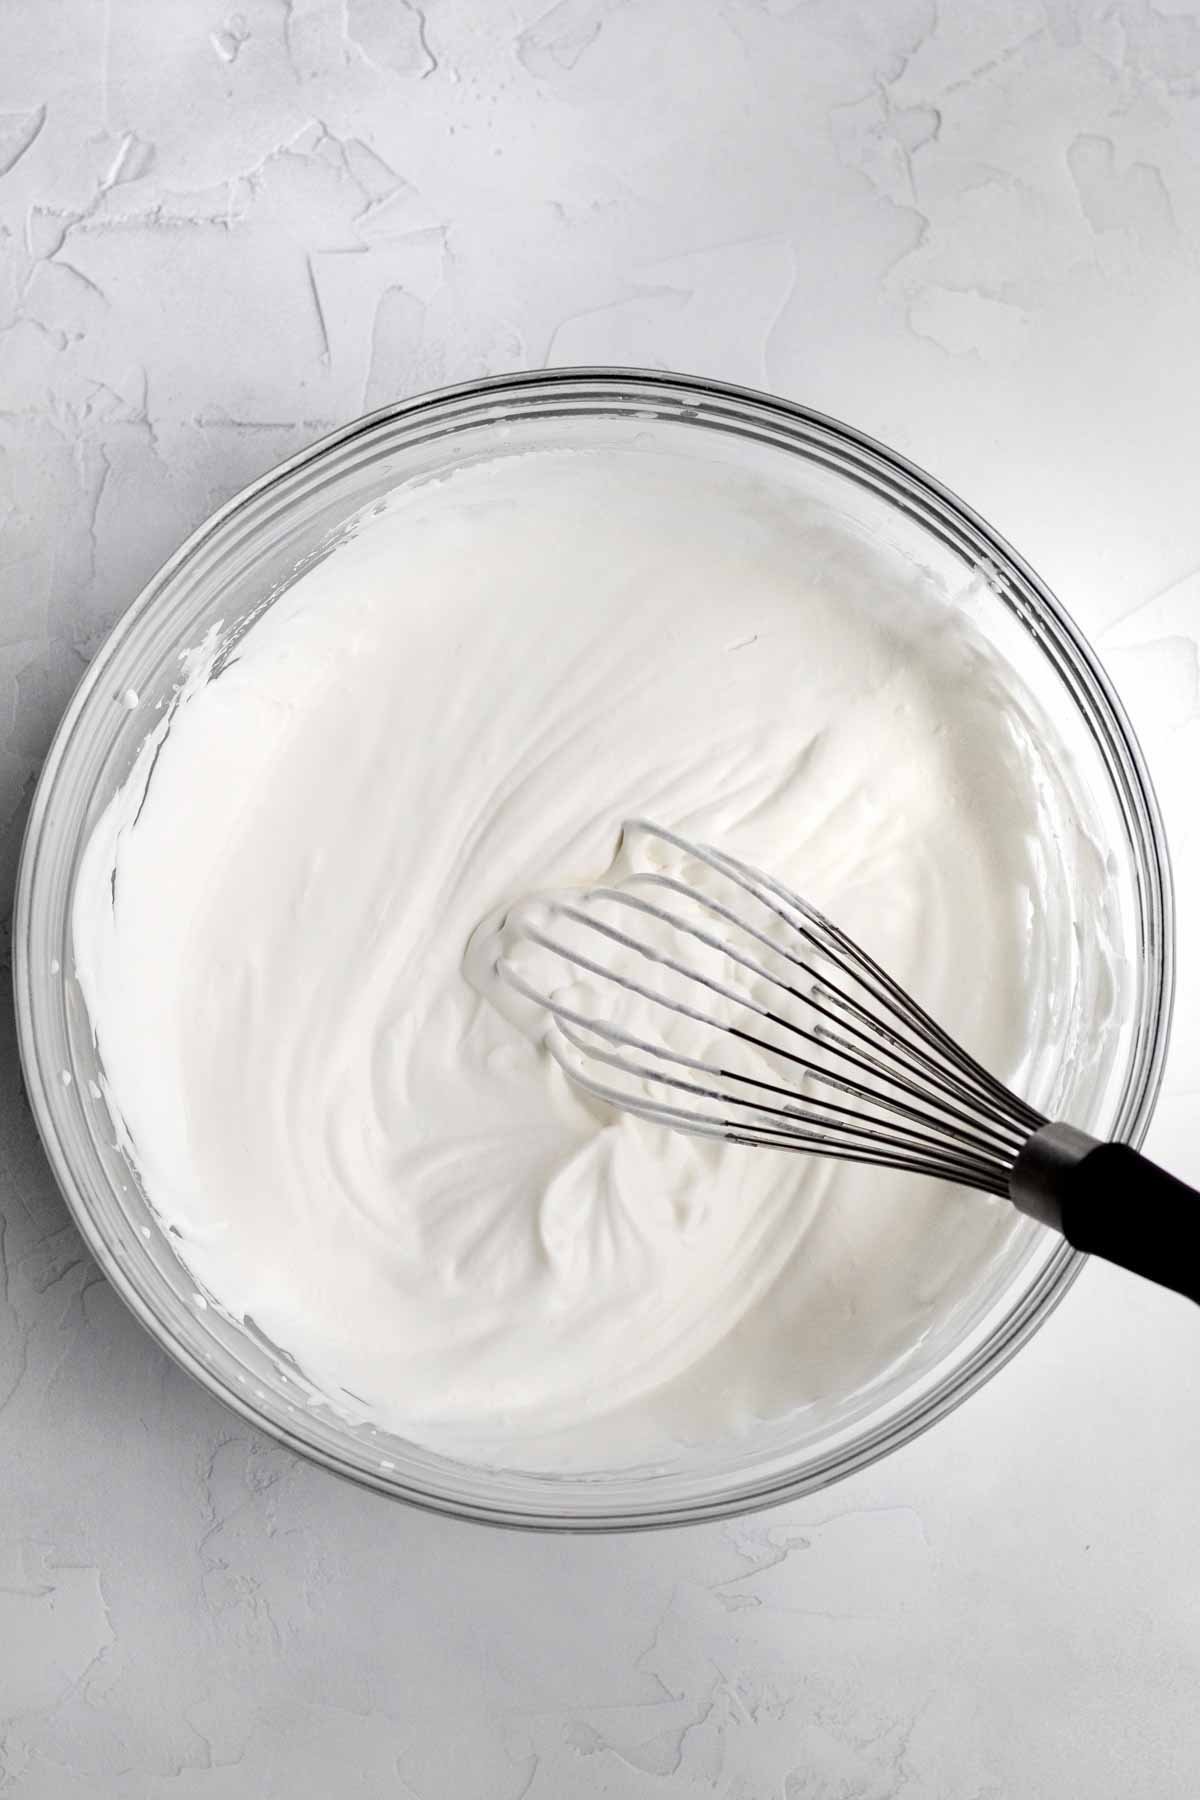 Heavy cream whipped with a whisk in a glass bowl.